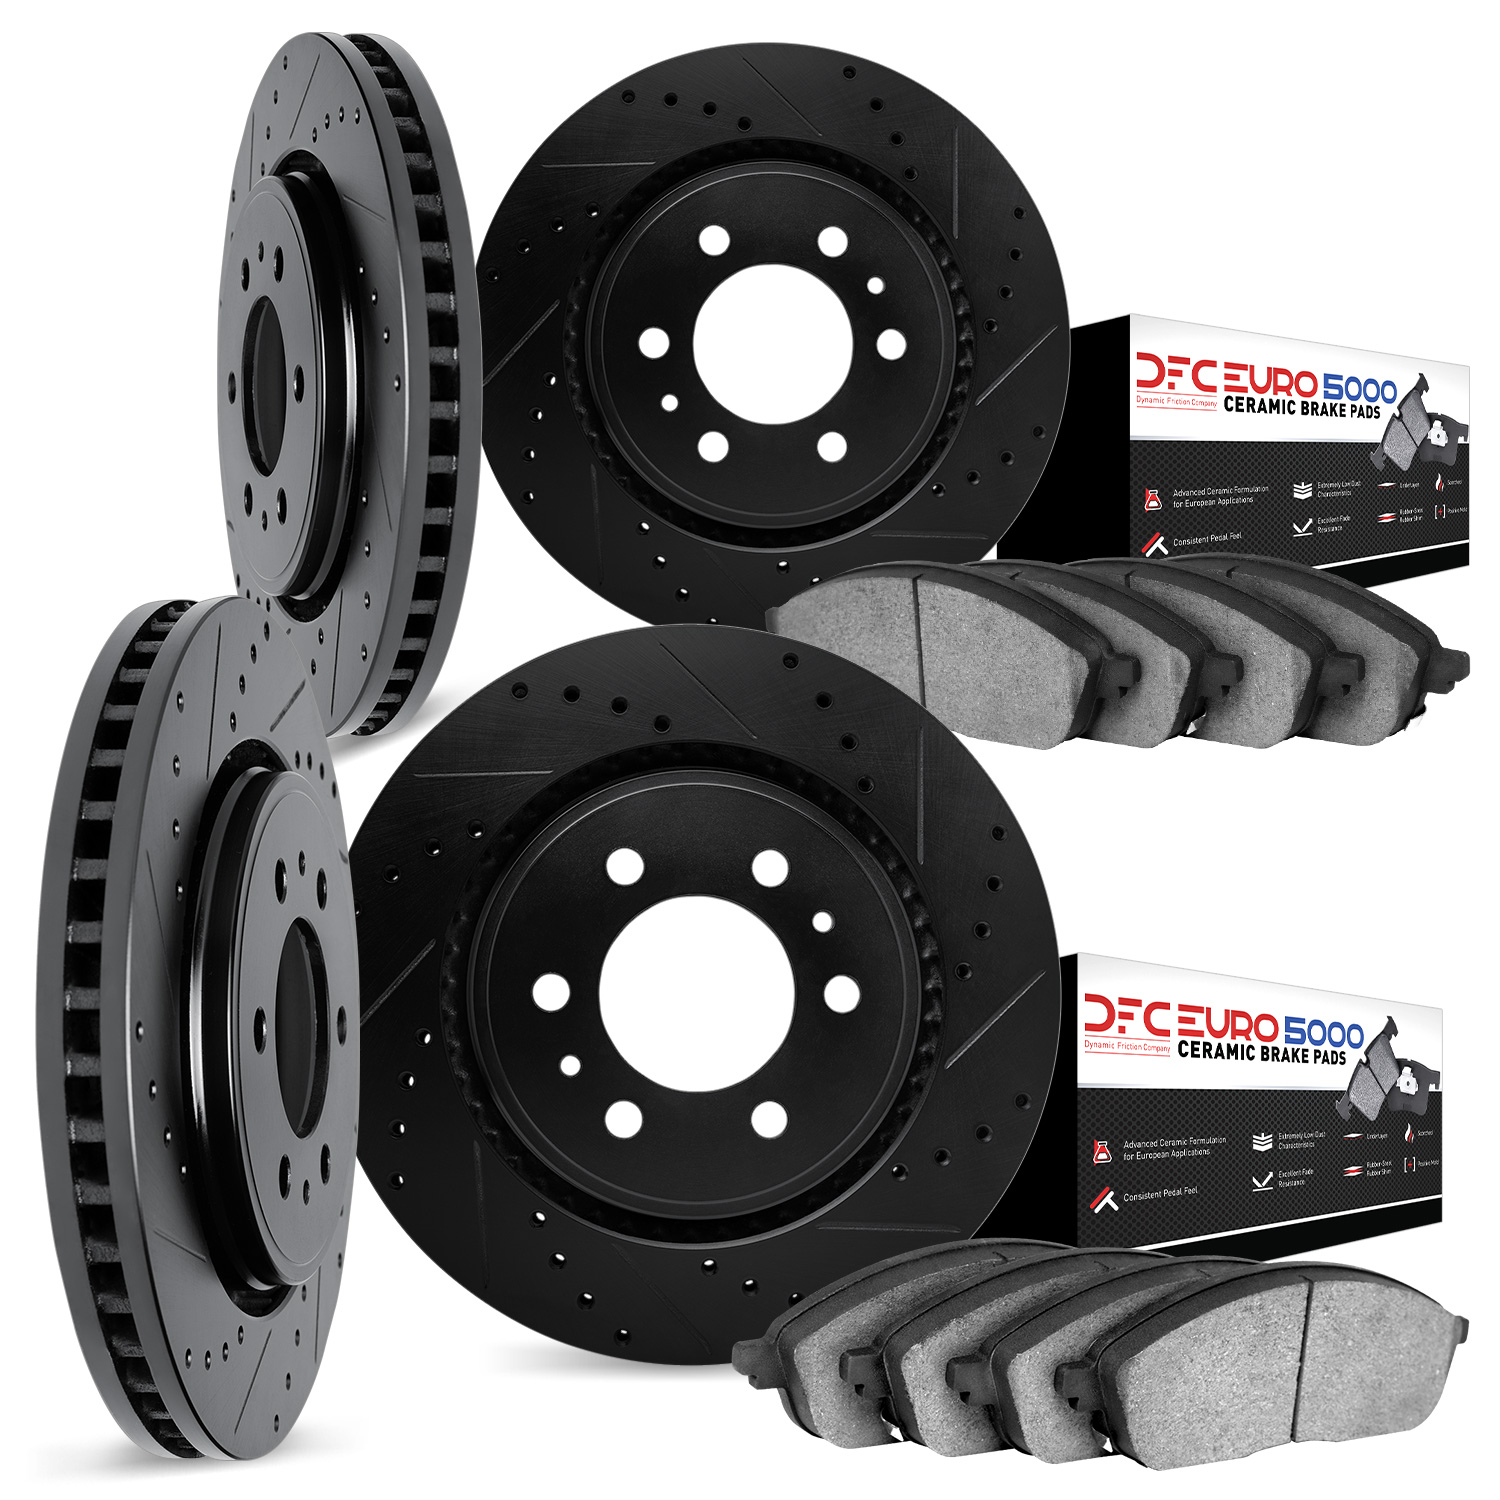 8604-47000 Drilled/Slotted Brake Rotors w/5000 Euro Ceramic Brake Pads Kit [Black], 2006-2009 GM, Position: Front and Rear